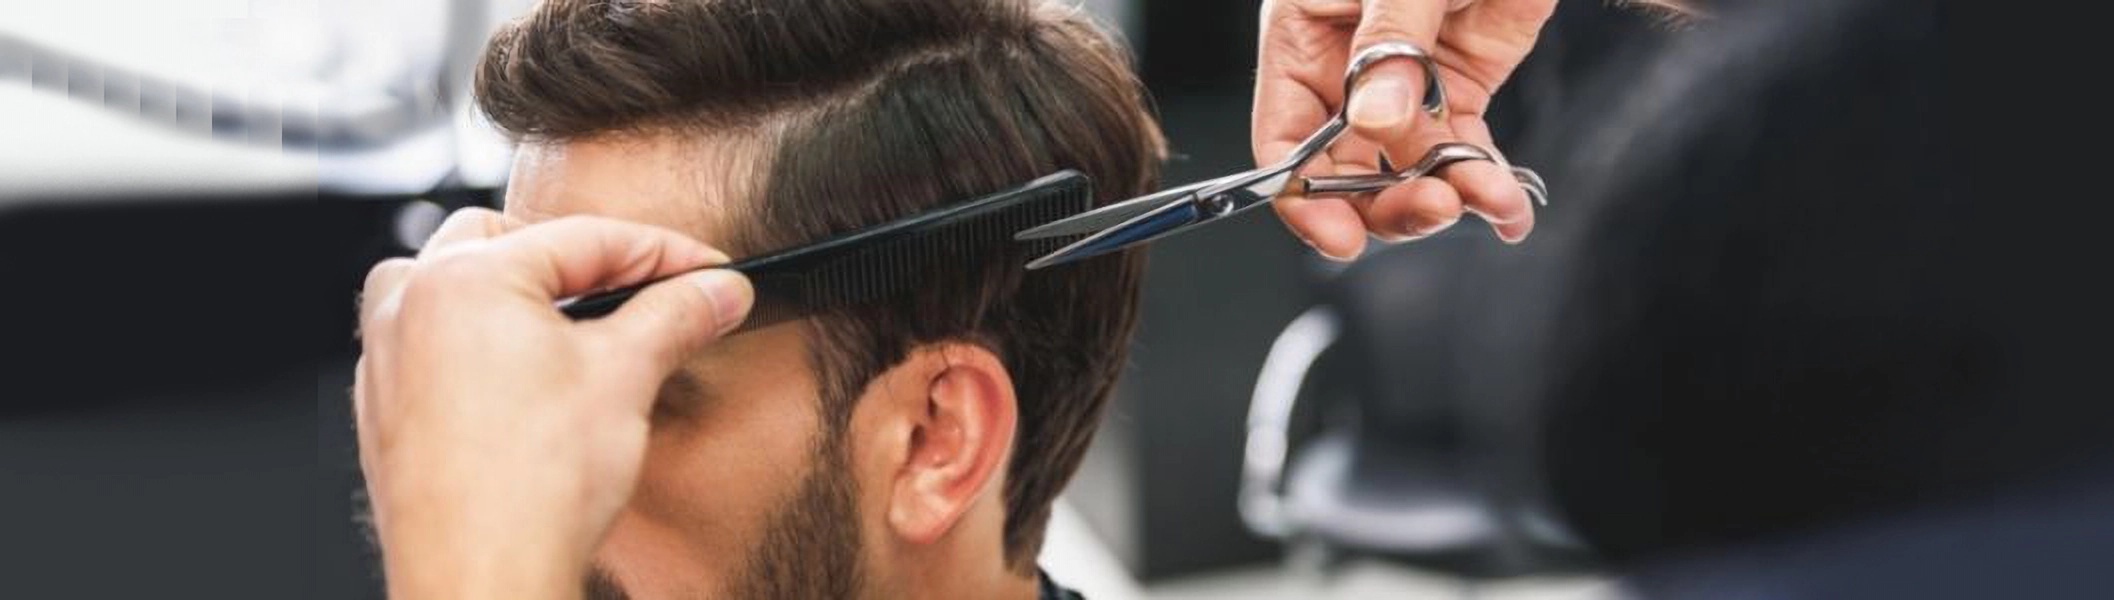 Hair cutting and styling after hair transplantation